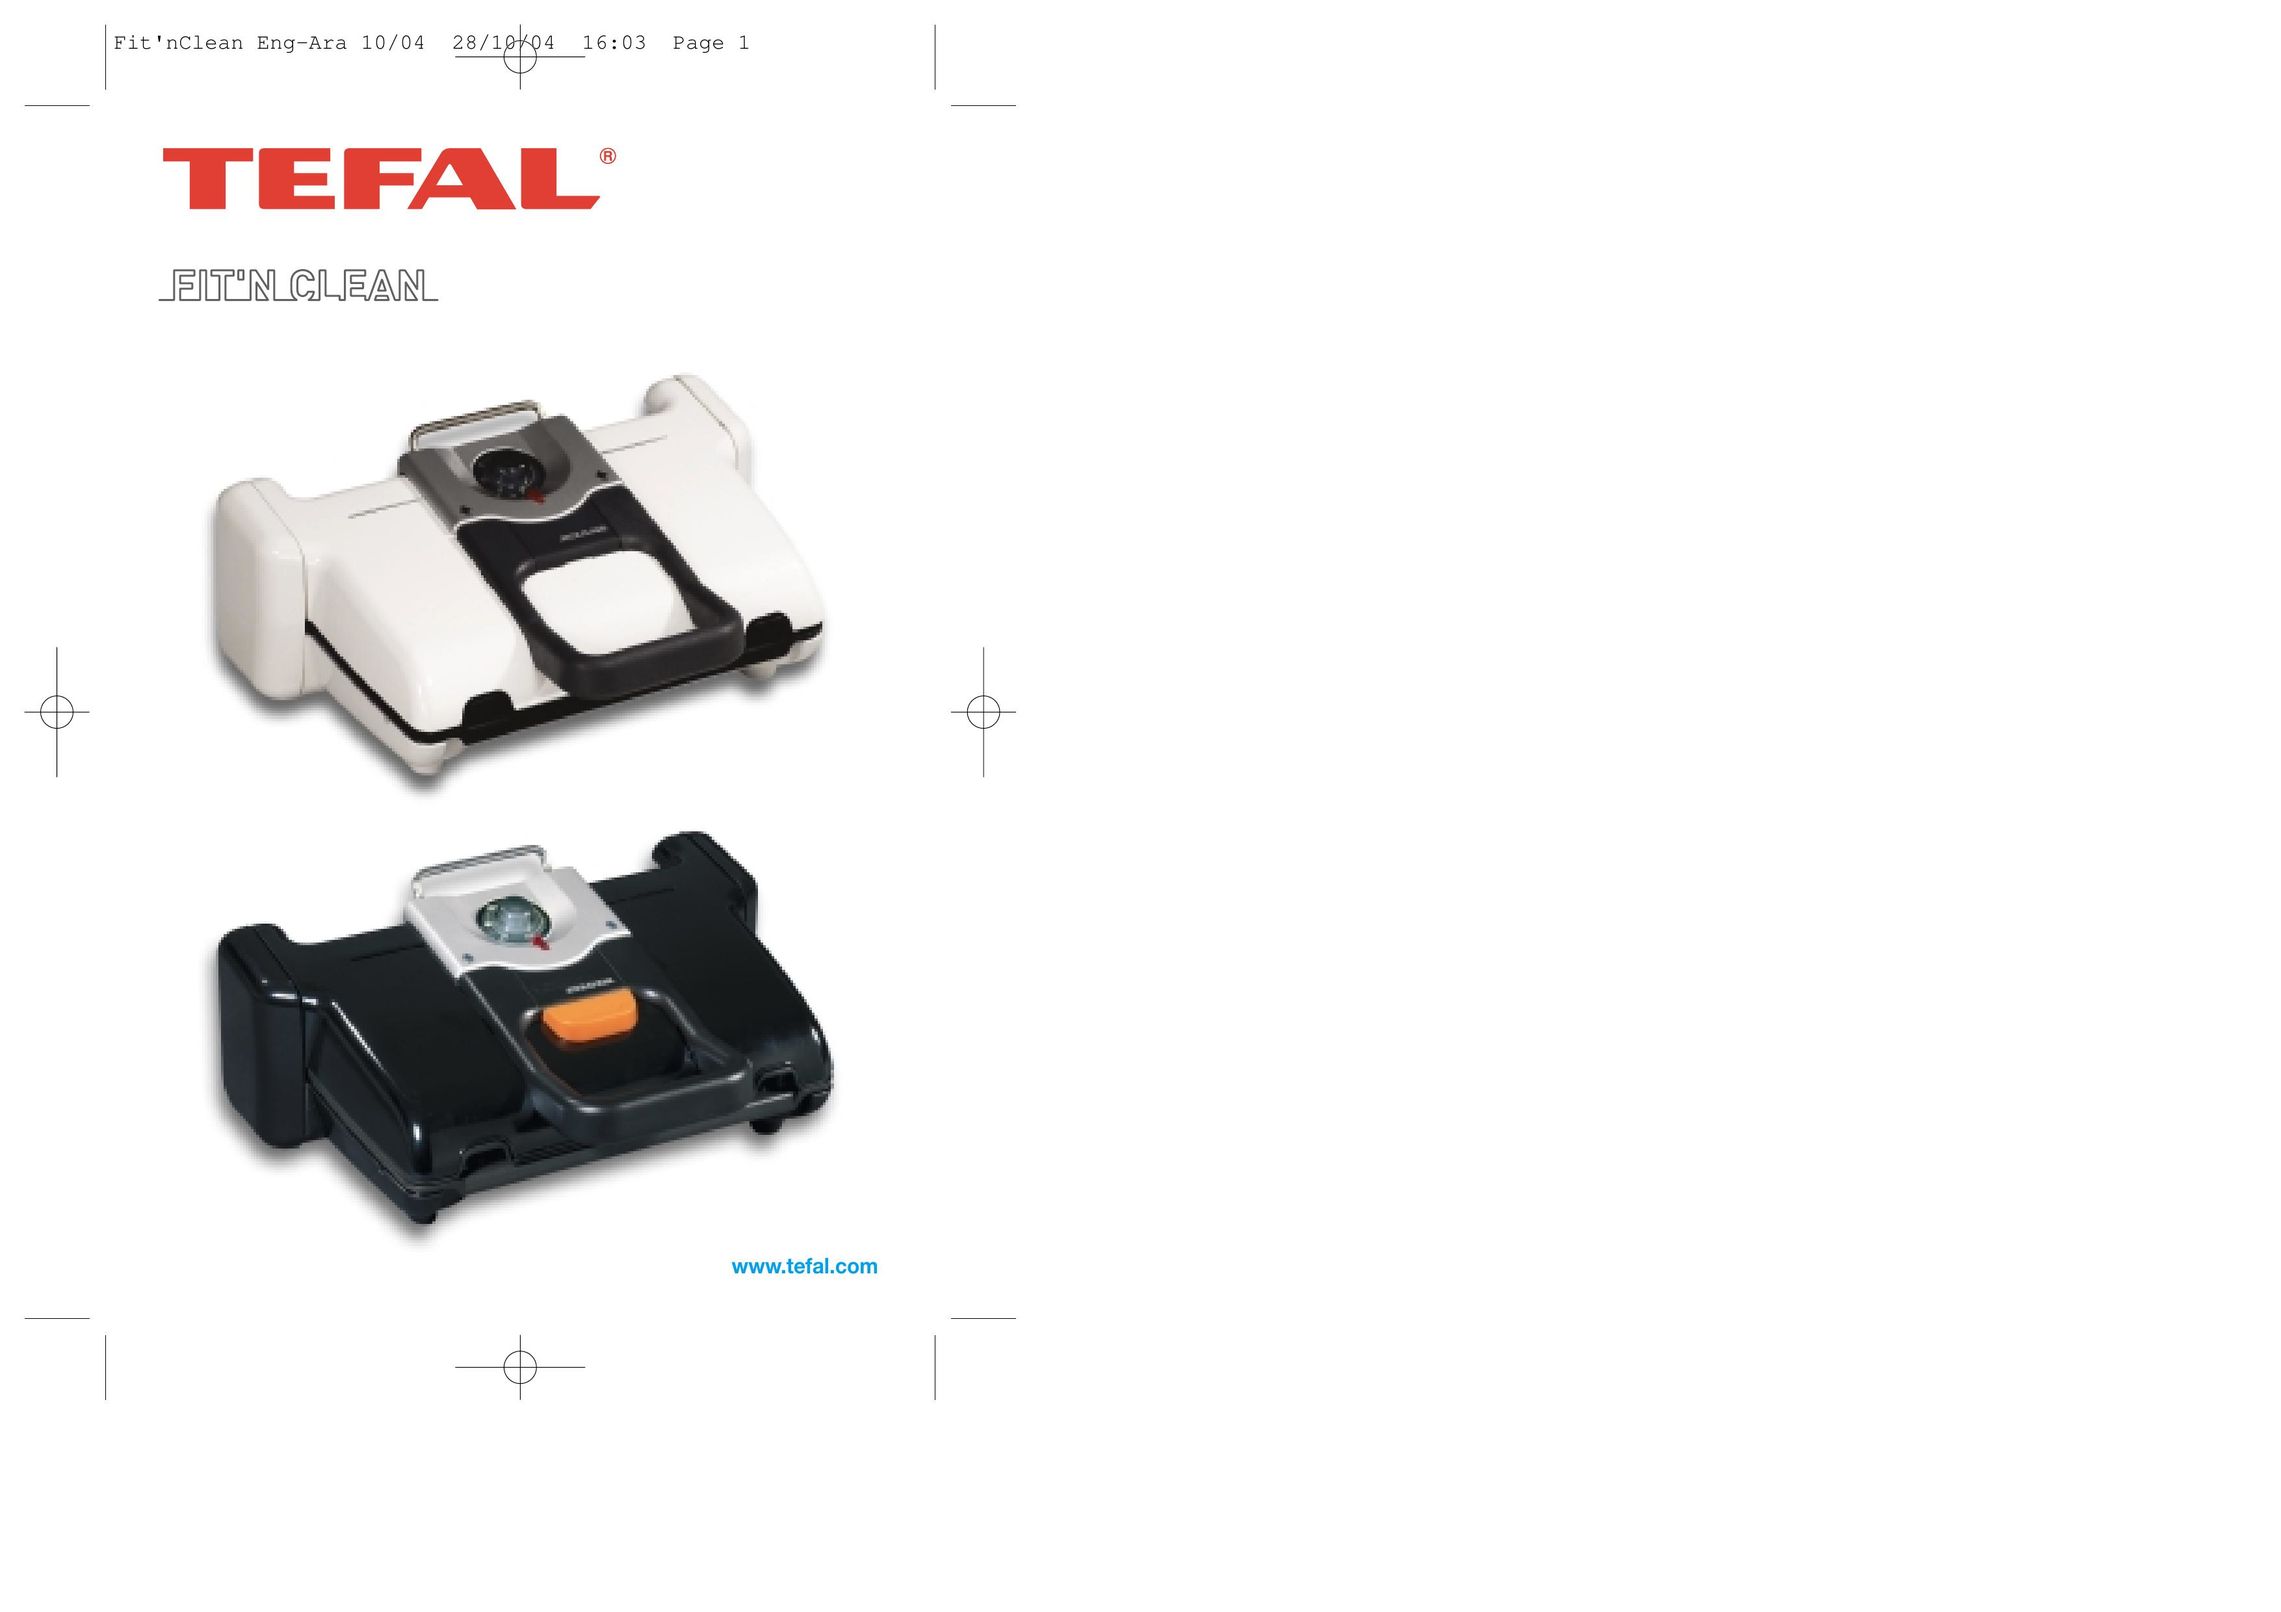 Groupe SEB USA - T-FAL FIT'N CLEAN Kitchen Grill User Manual